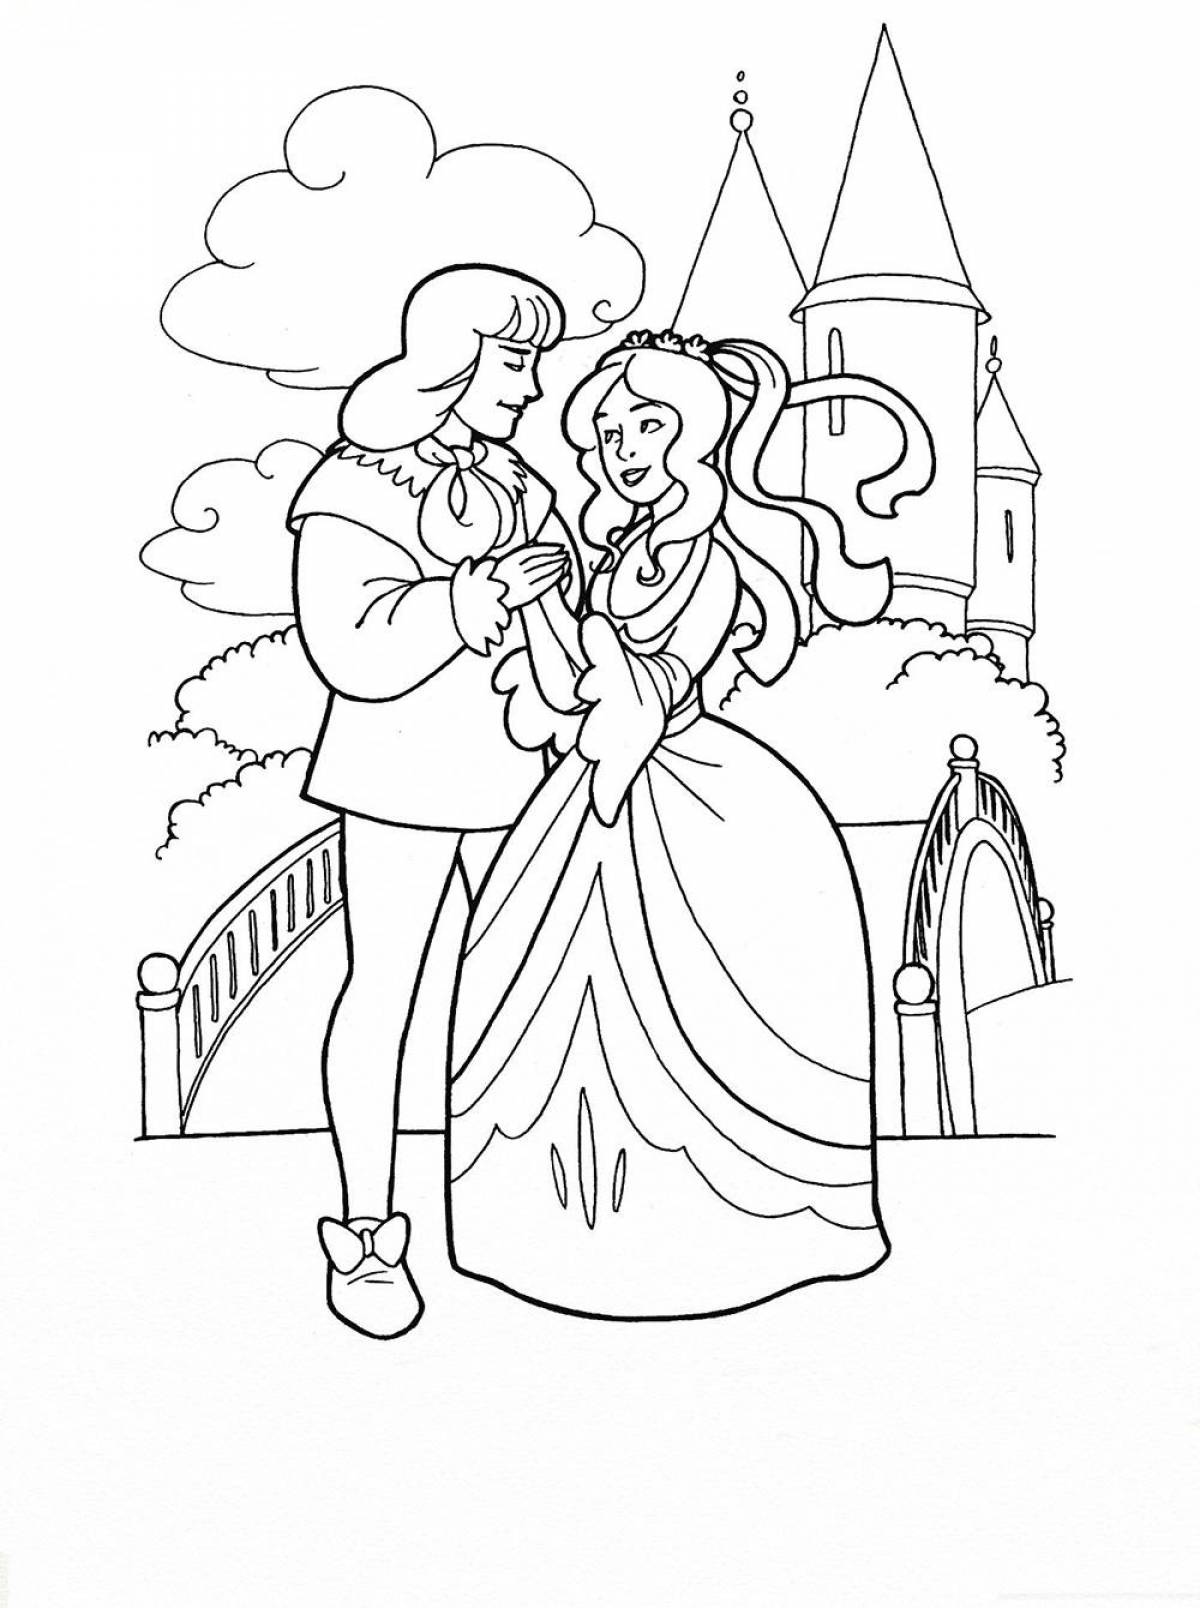 Charles Perrault's lively coloring pages